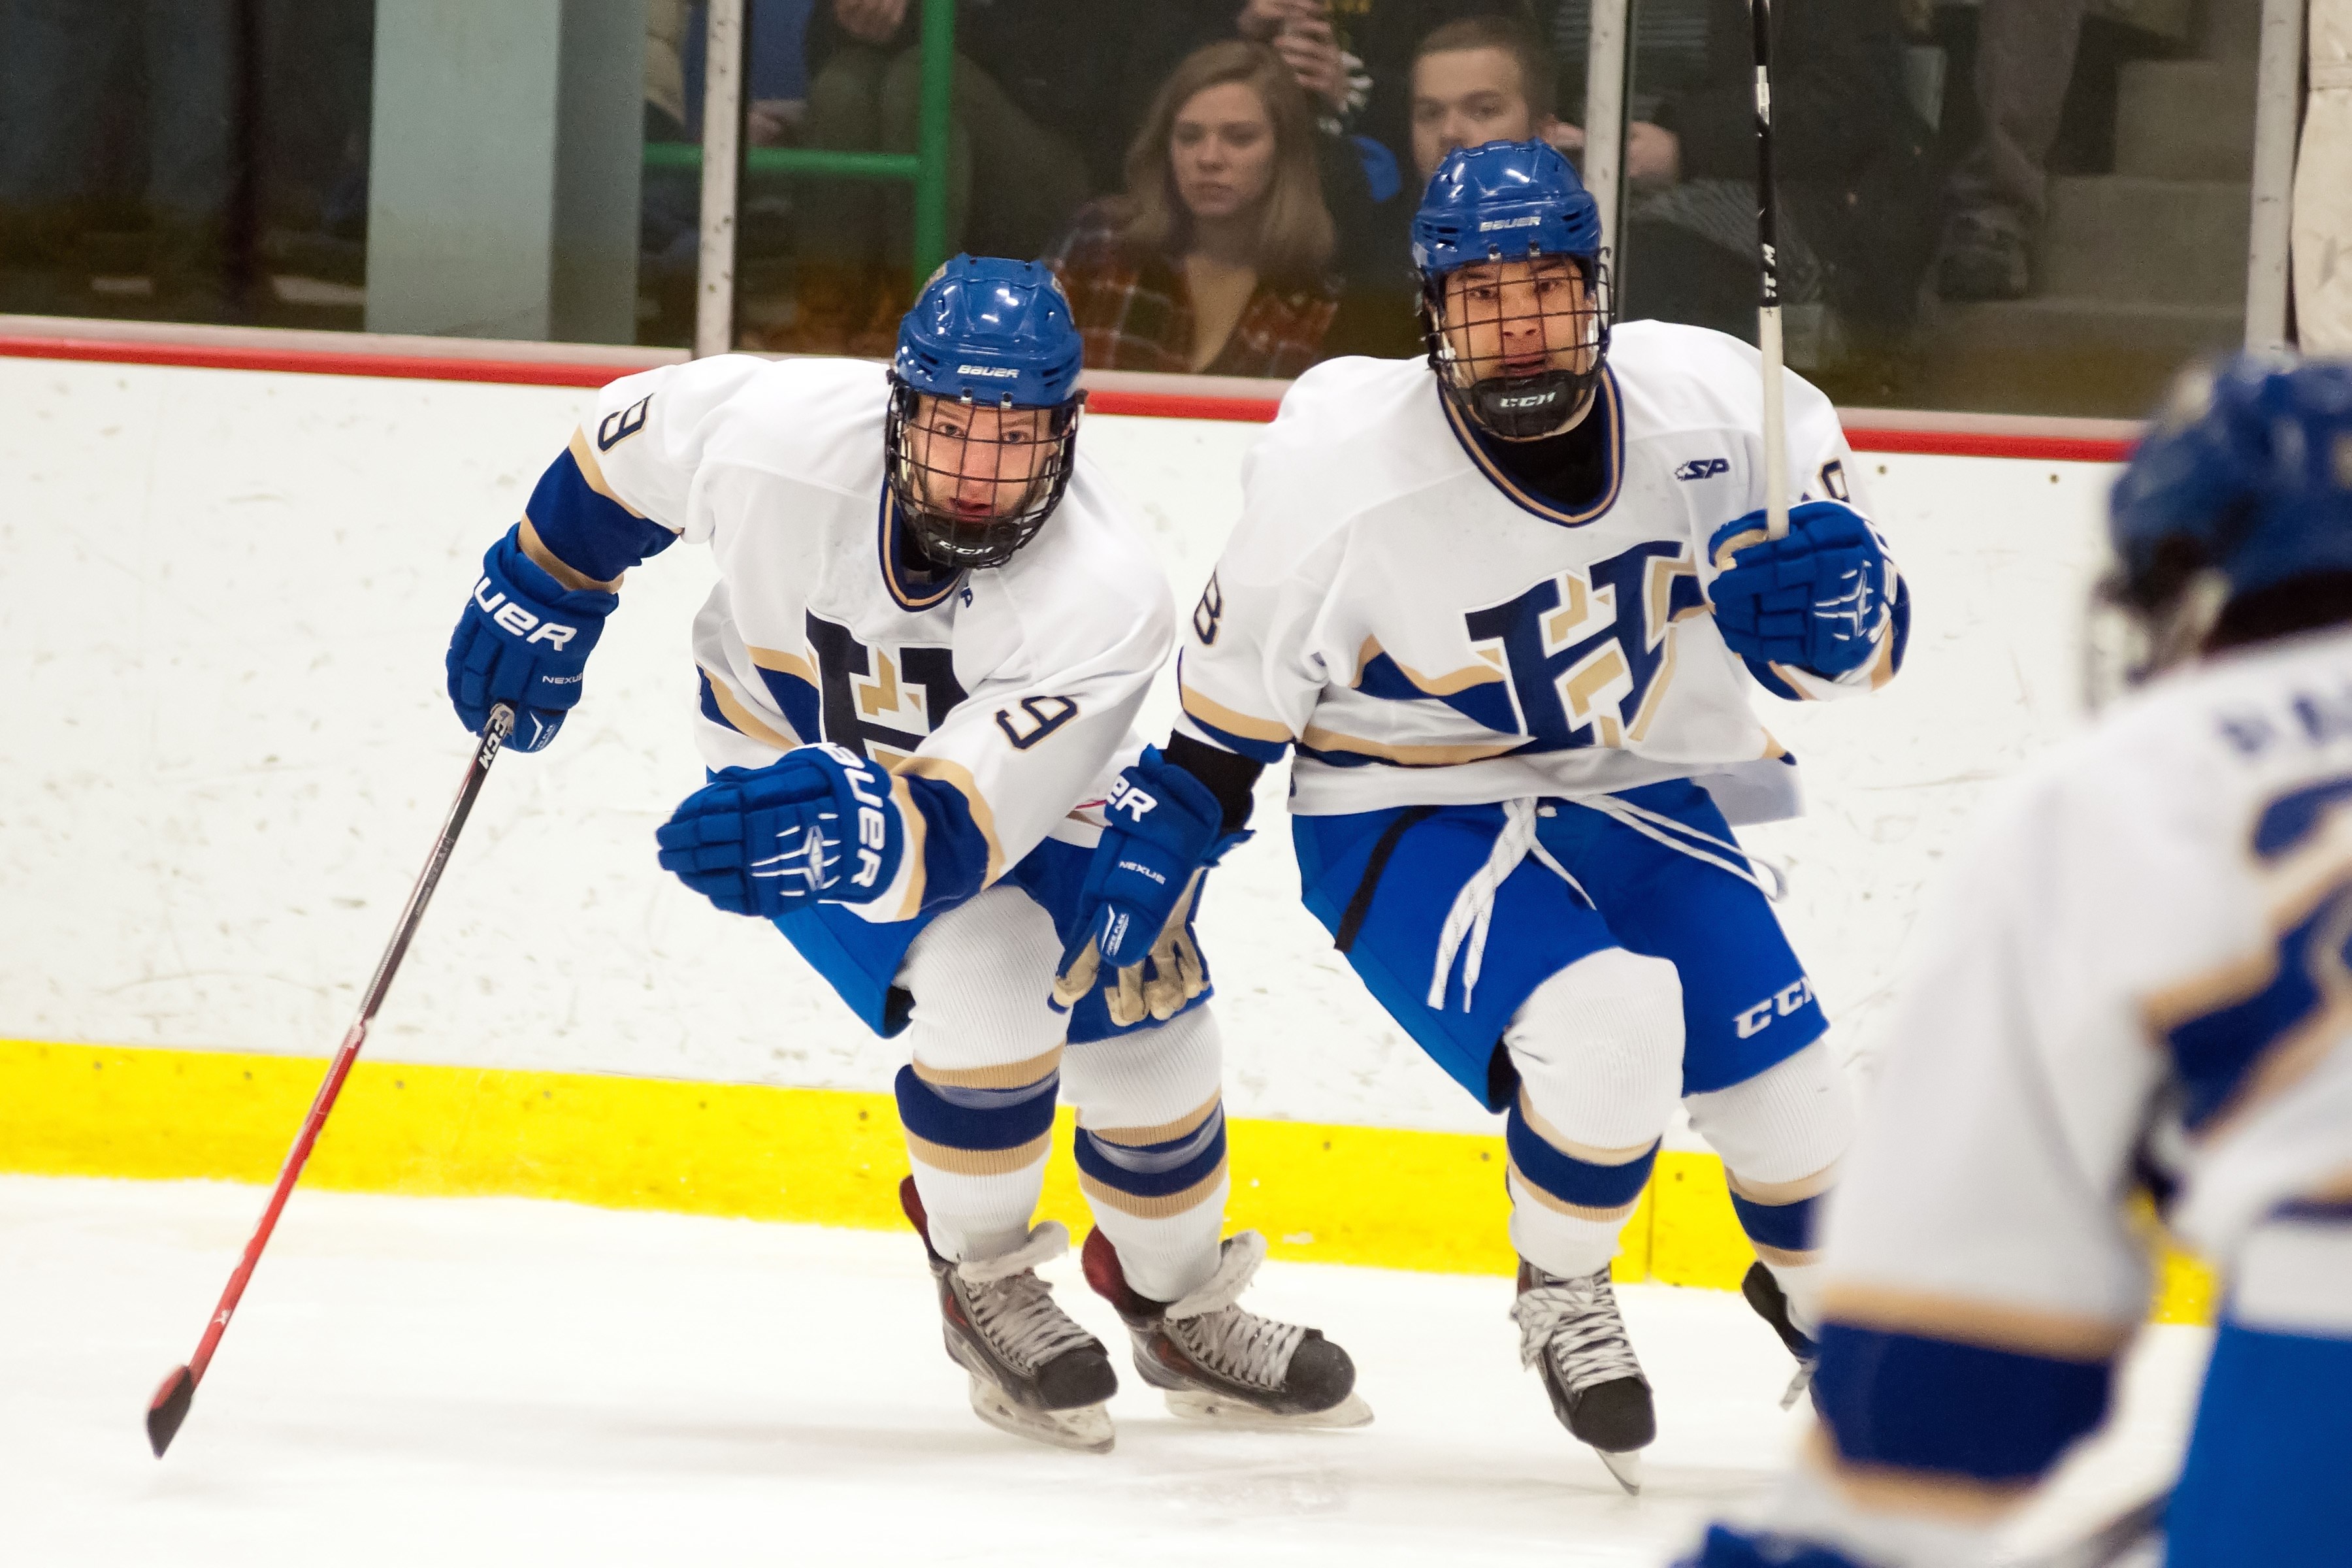 Men's hockey ties school record with fourth tie this